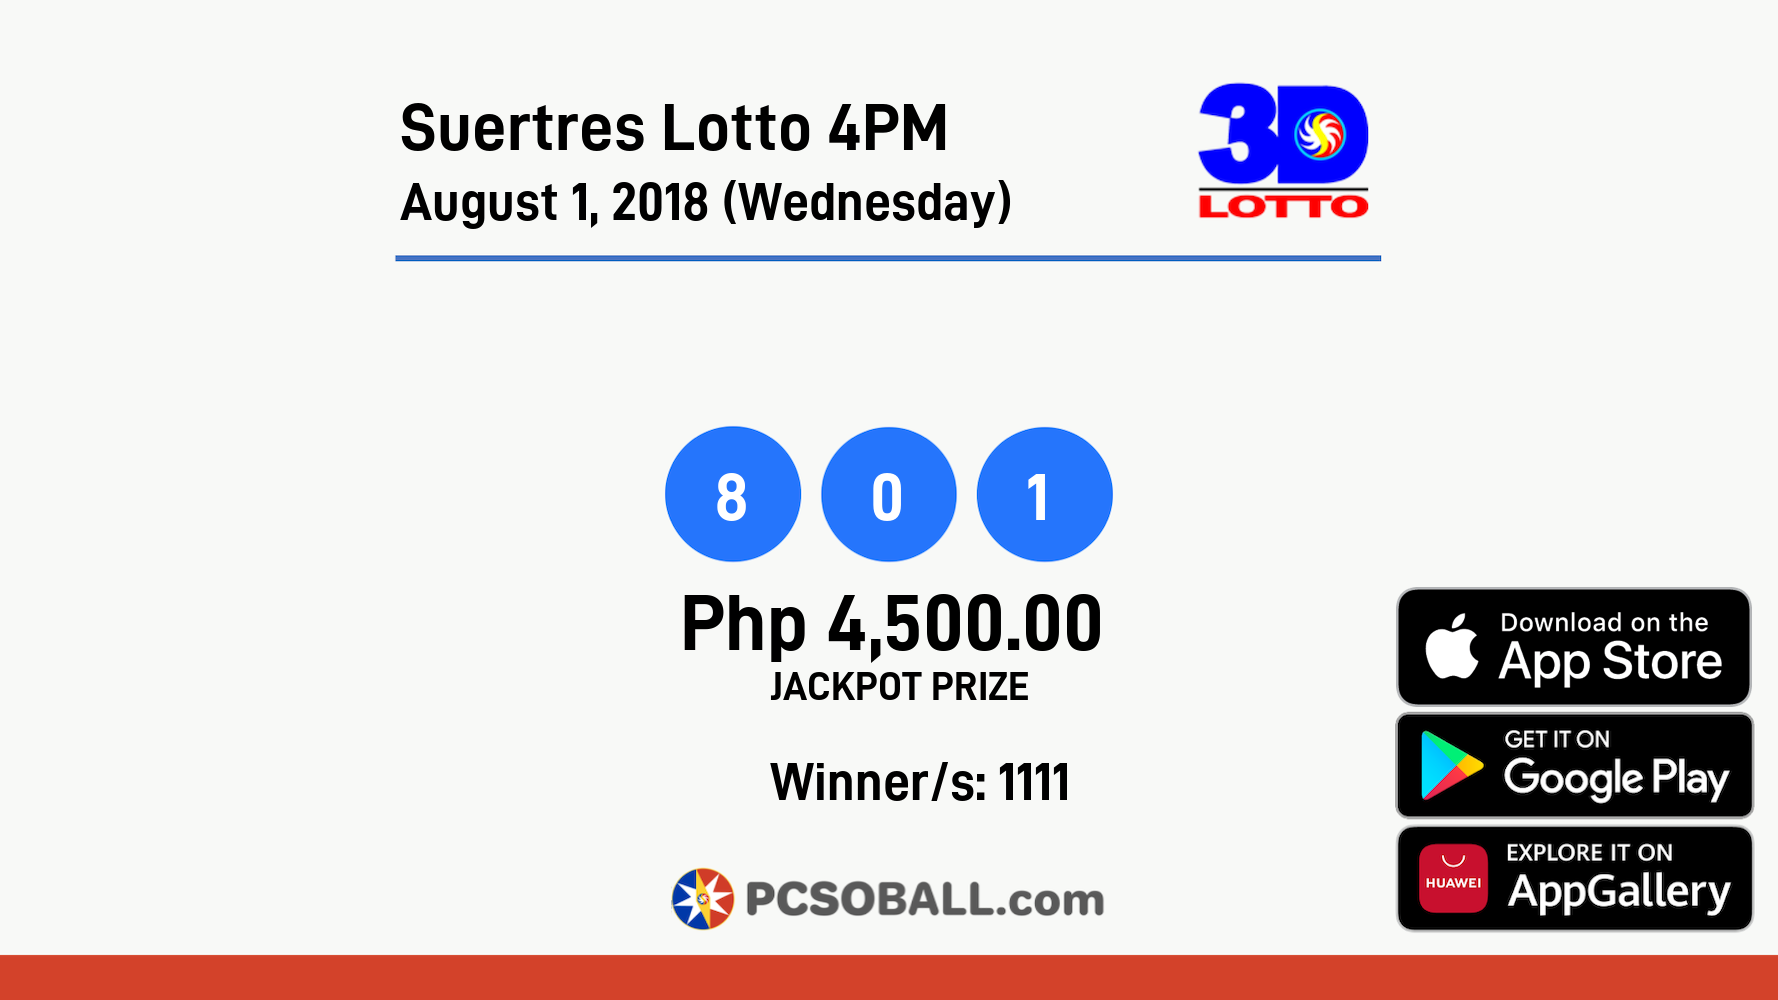 Suertres Lotto 4PM August 1, 2018 (Wednesday) Result